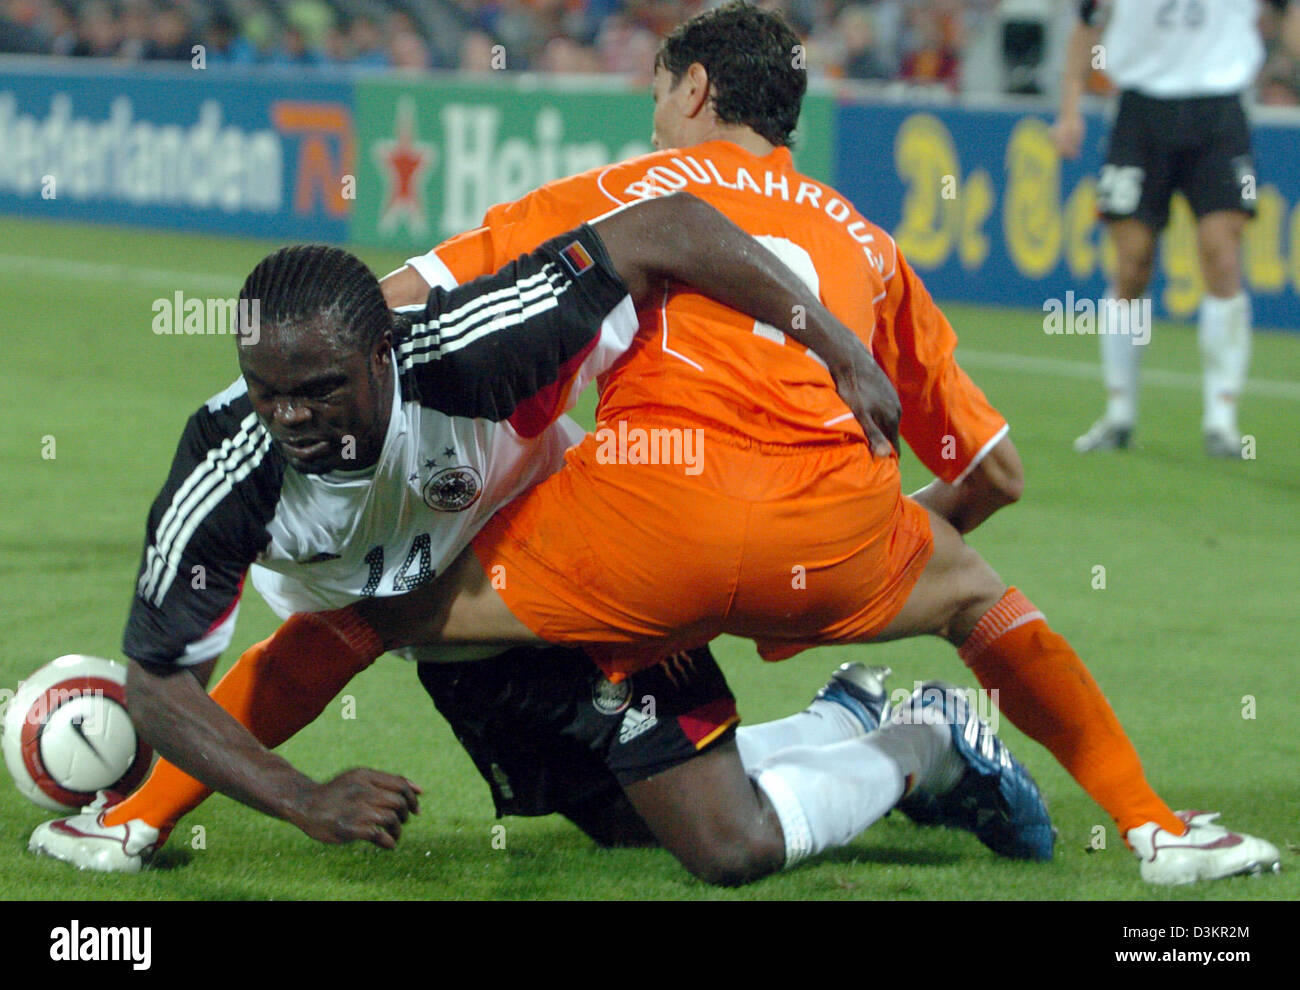 (dpa) - German national soccer player Gerald Asamoah (L) fights for the ball with Dutch national player Khalid Boulahrouz during the friendly match Netherlands vs Germany at the 'De Kuip' stadium in Rotterdam, Netherlands, 17 August 2005. The game ended in a 2-2 draw. Photo: Frank May Stock Photo